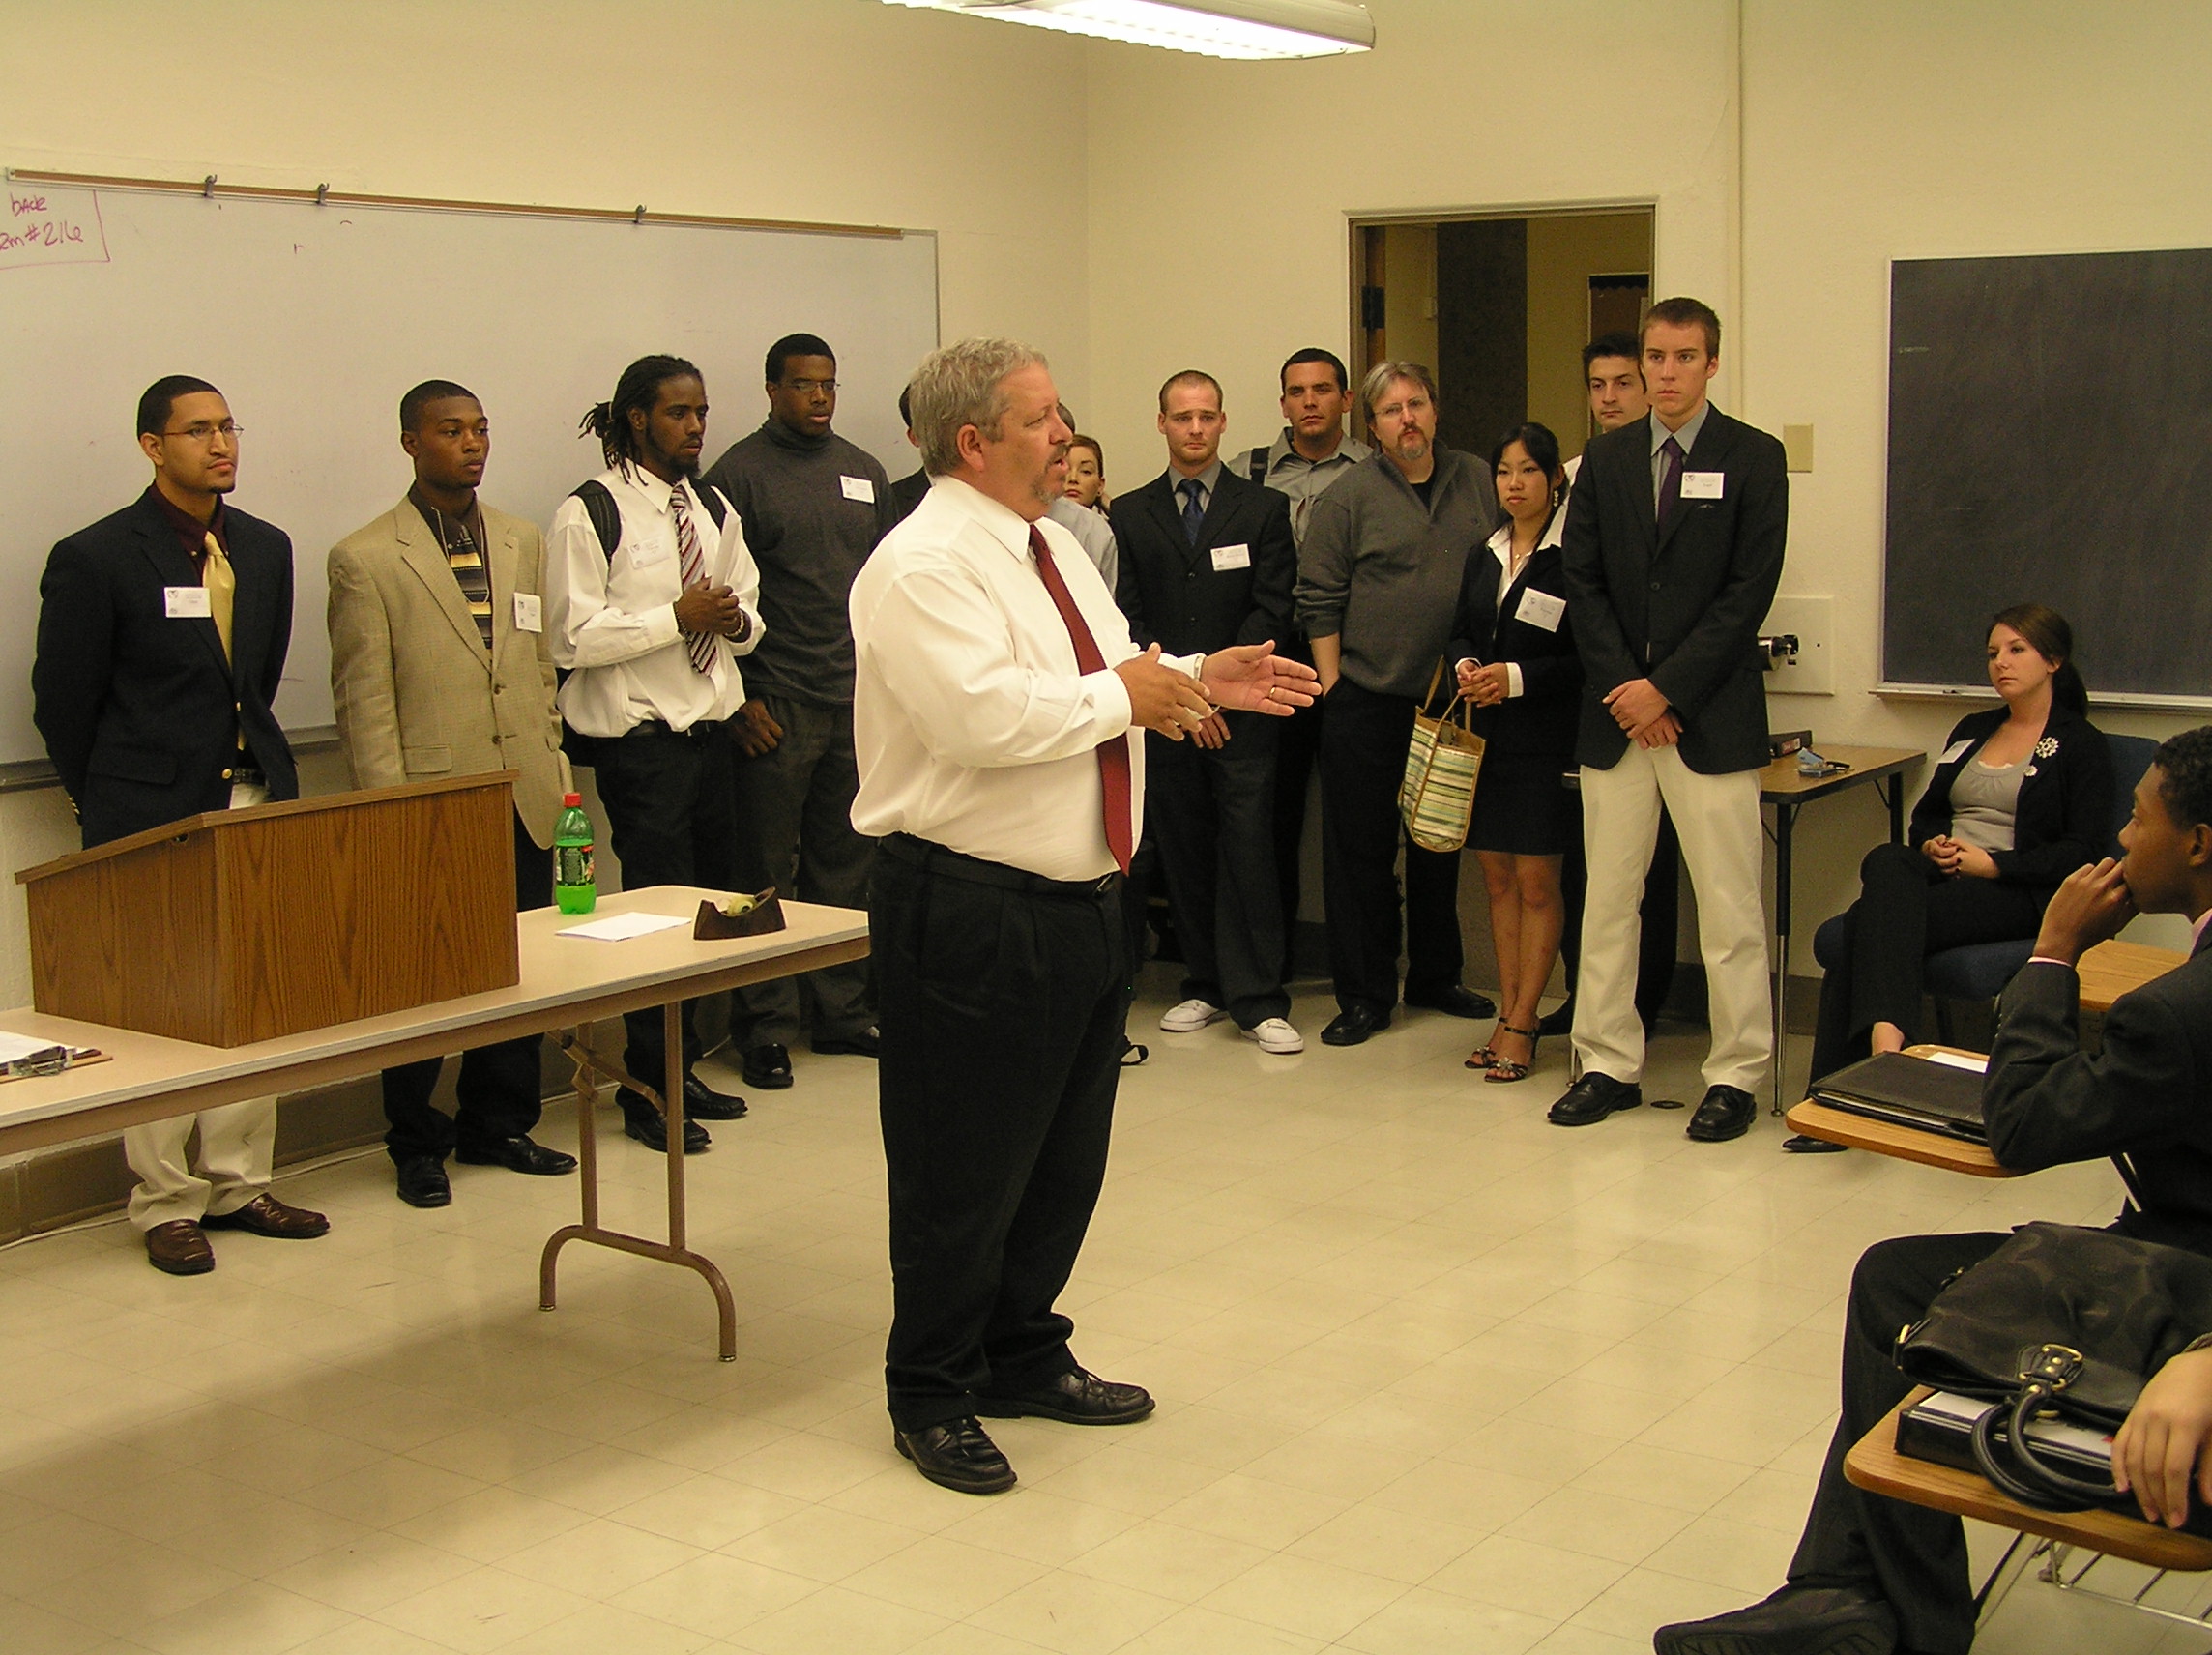 Dr. Rick Stripling, Vice Chancellor for Student Affairs, speaks to students.